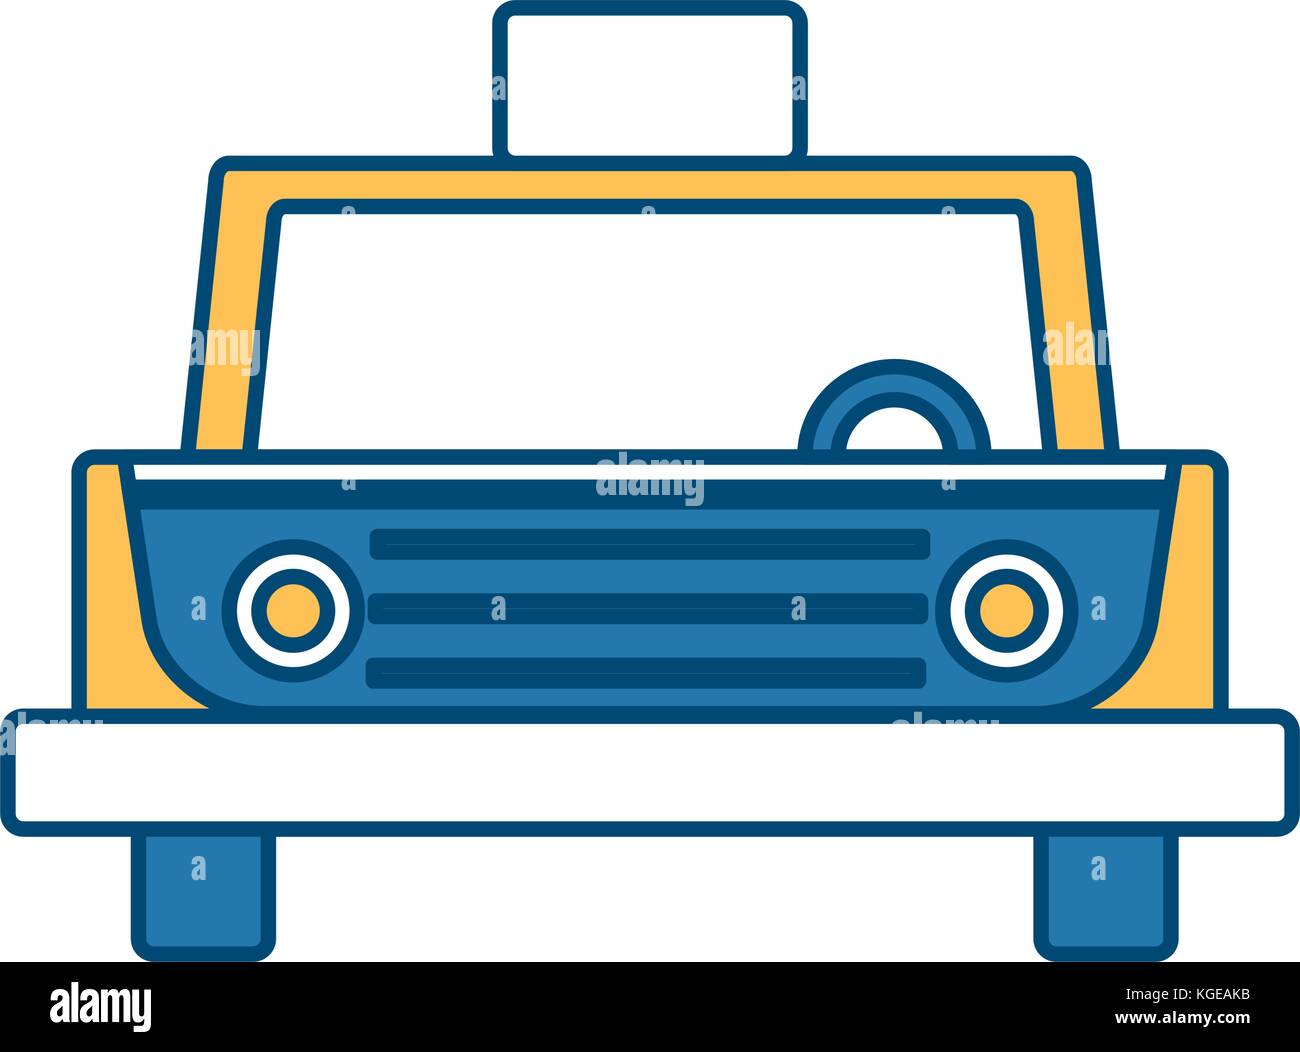 Taxi cab vehicle Stock Vector